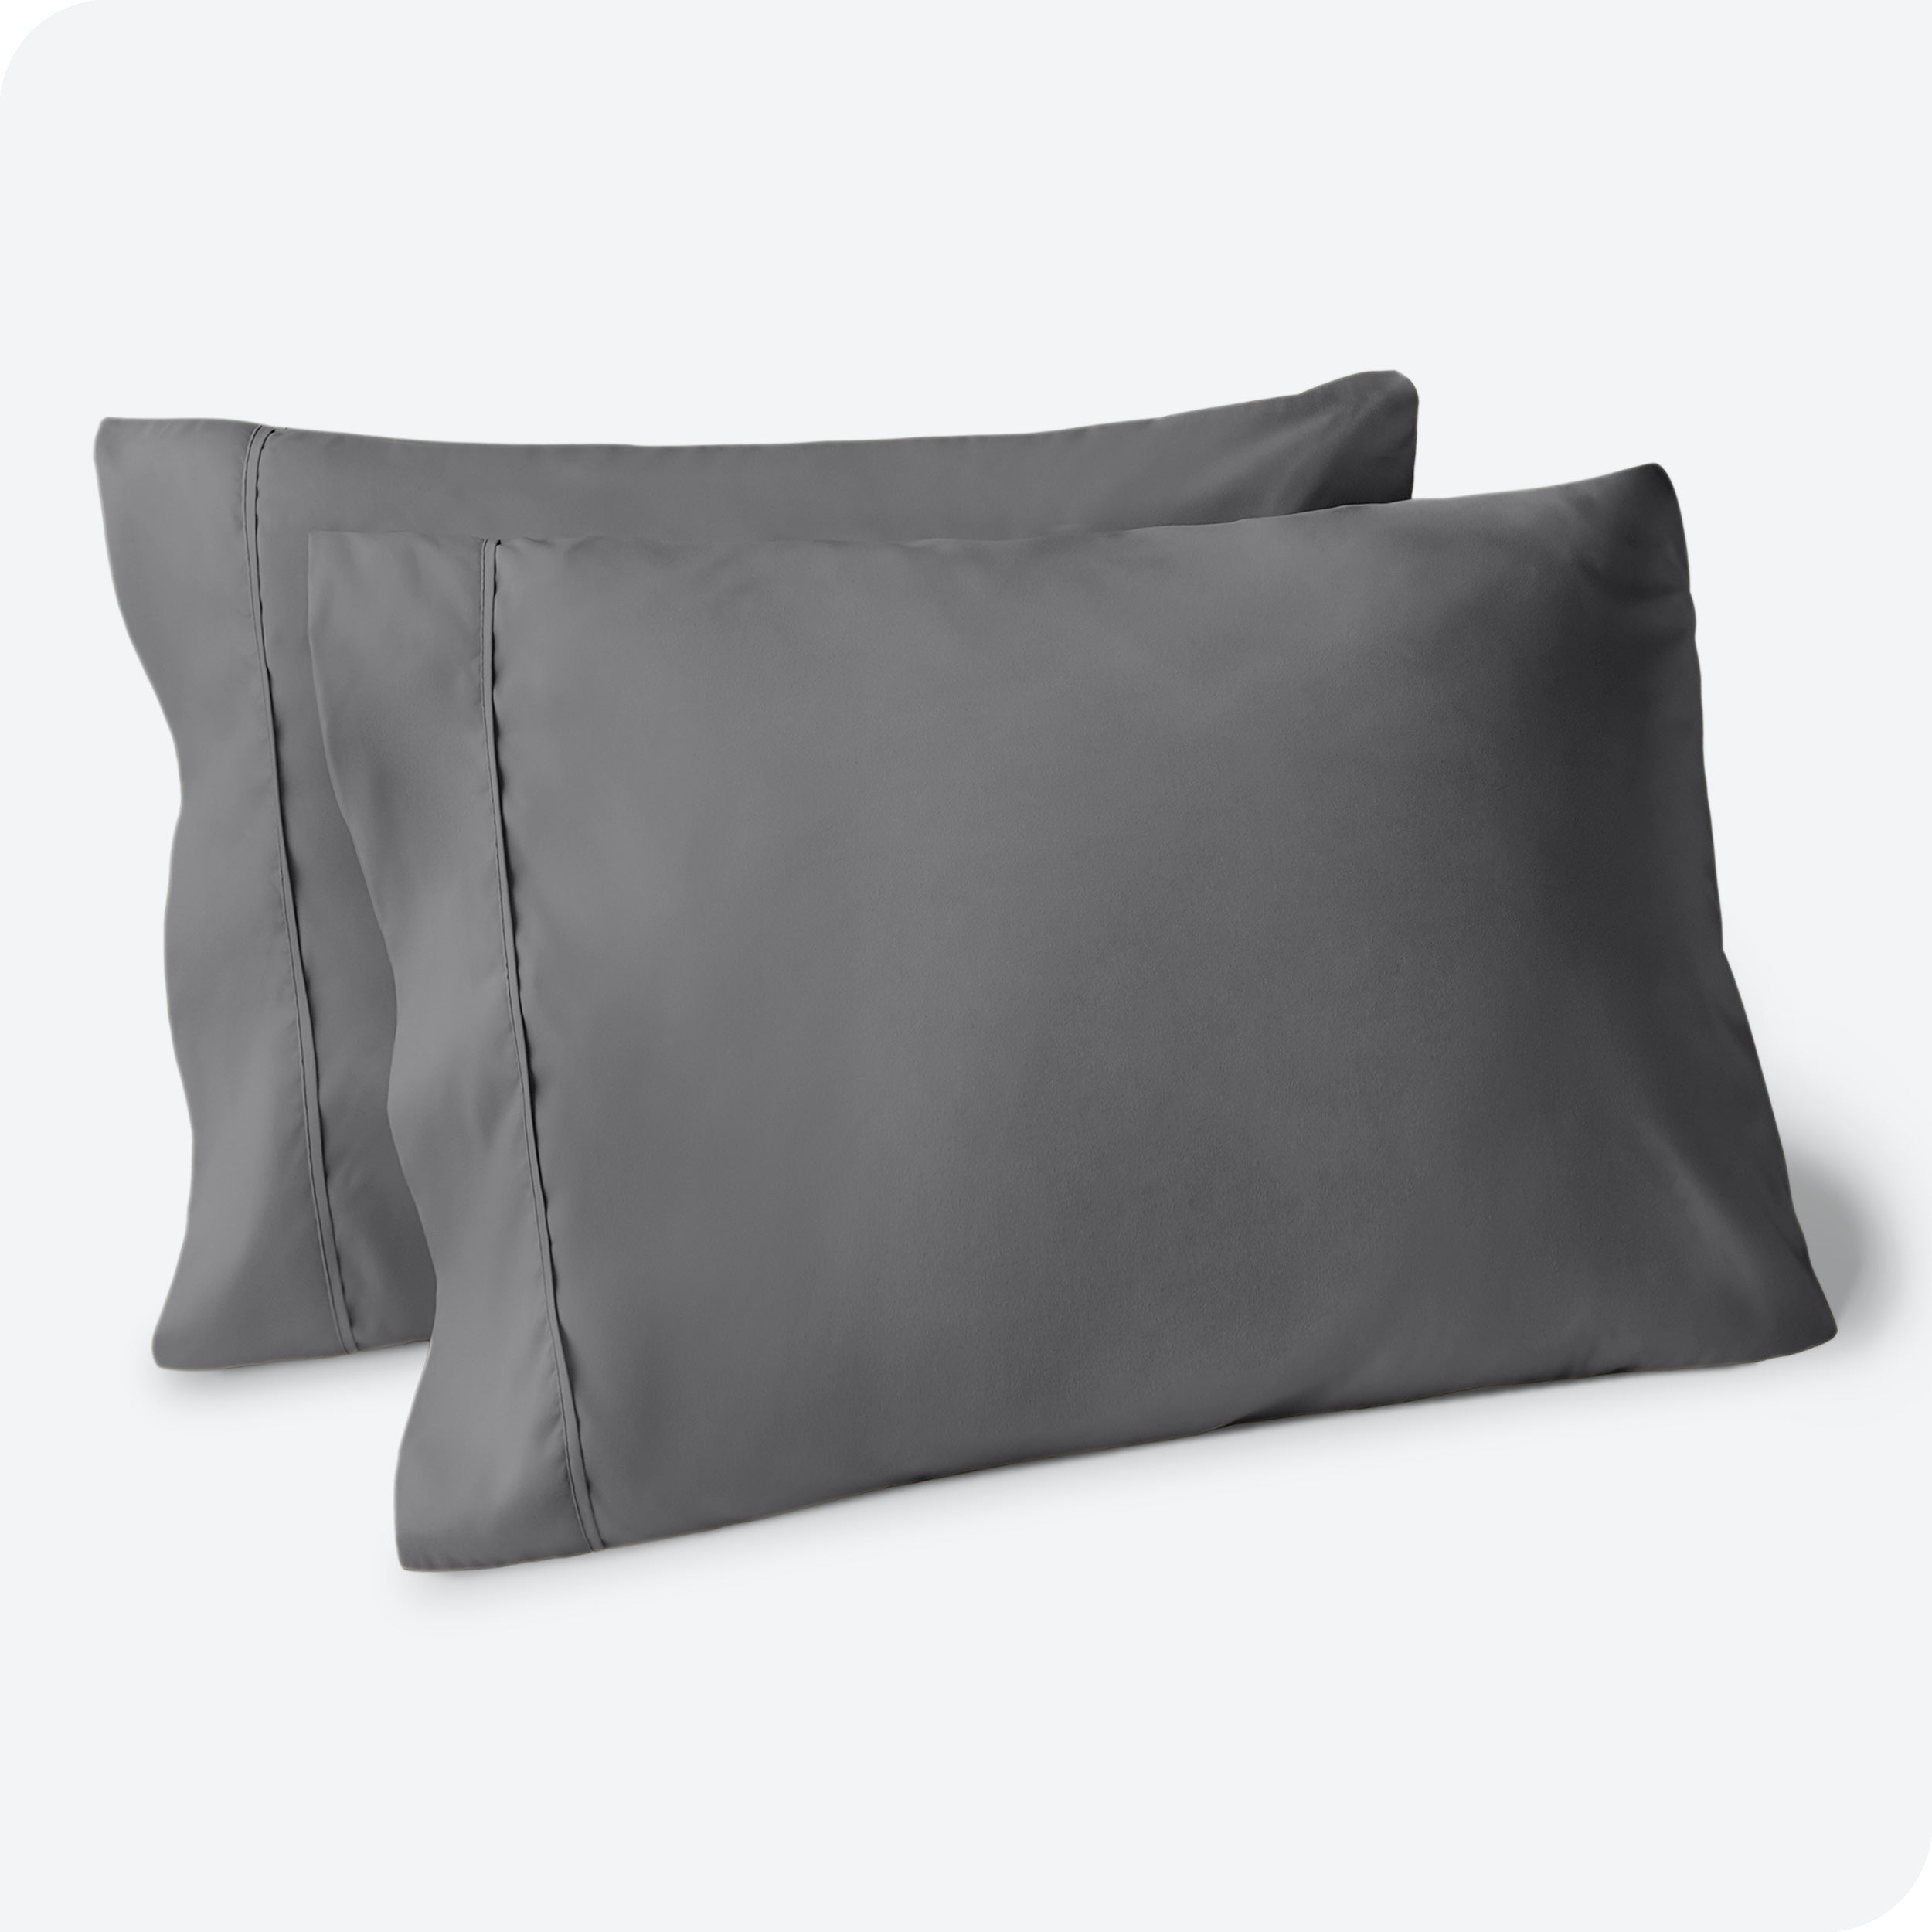 Two pillows on a white background with grey pillowcases on them